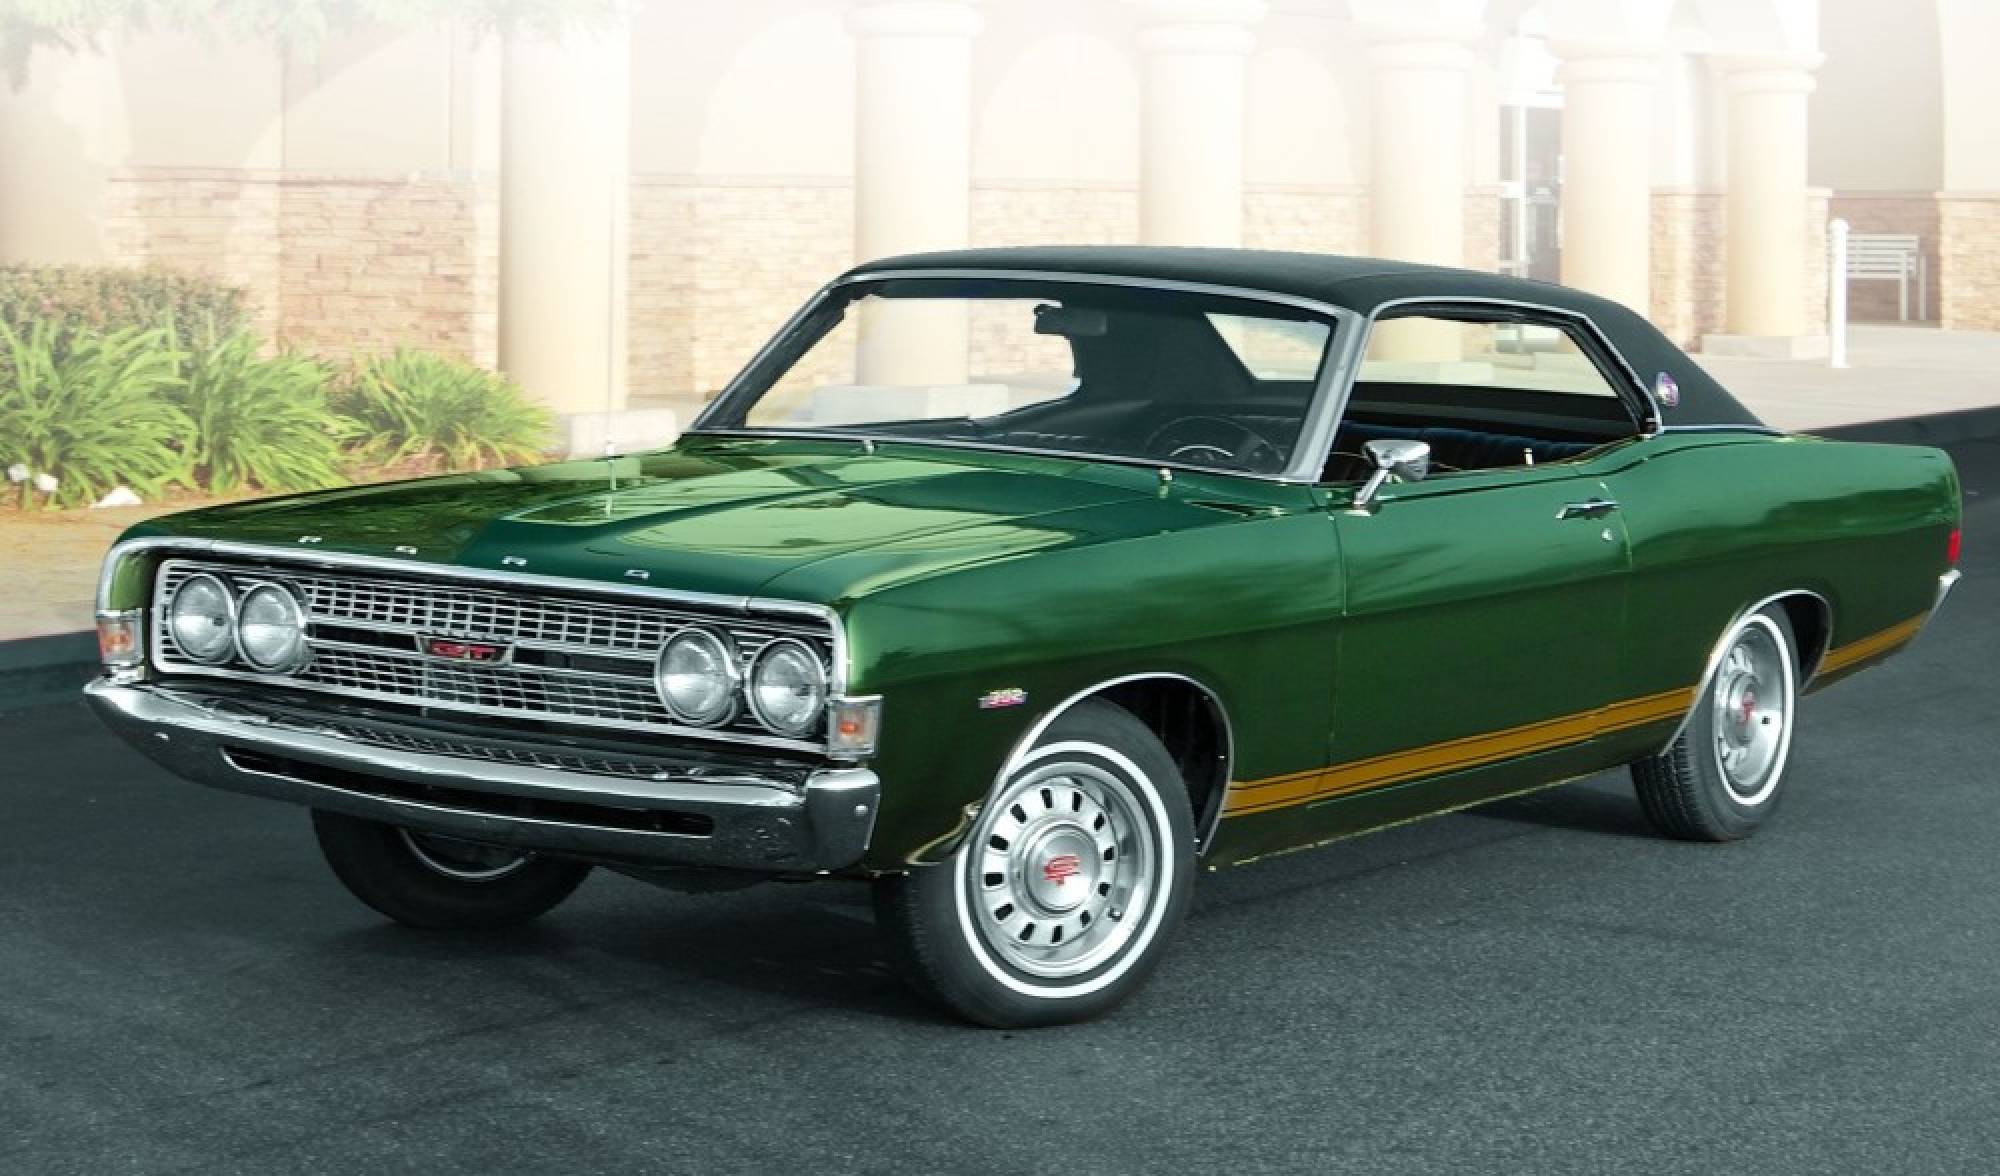 1968 Ford Torino GT Backgrounds on Wallpapers Vista